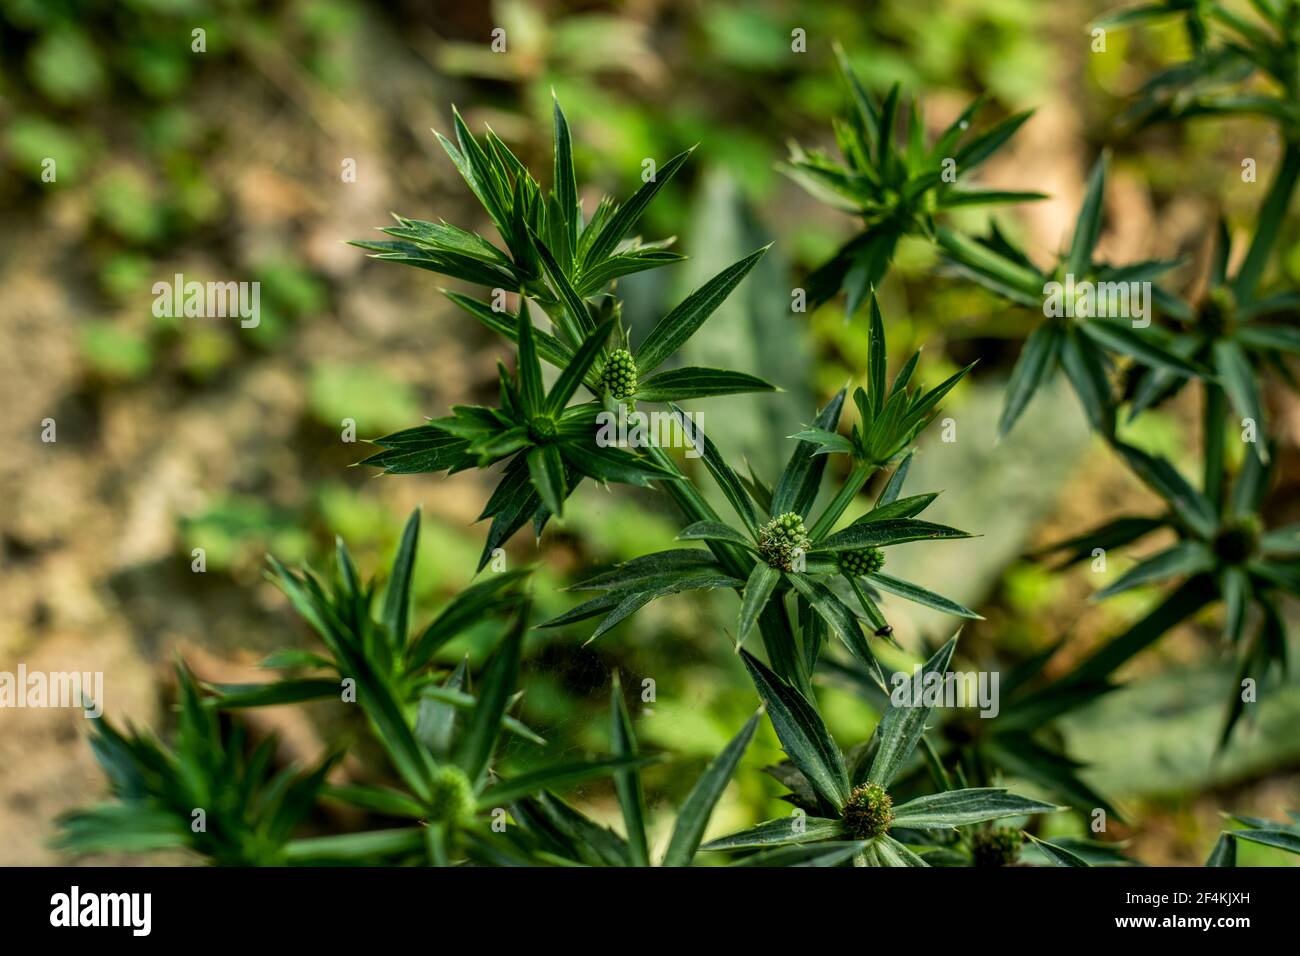 The Culantro is a wild herbal plant associated with the botanical name Eryngium foetidum Stock Photo